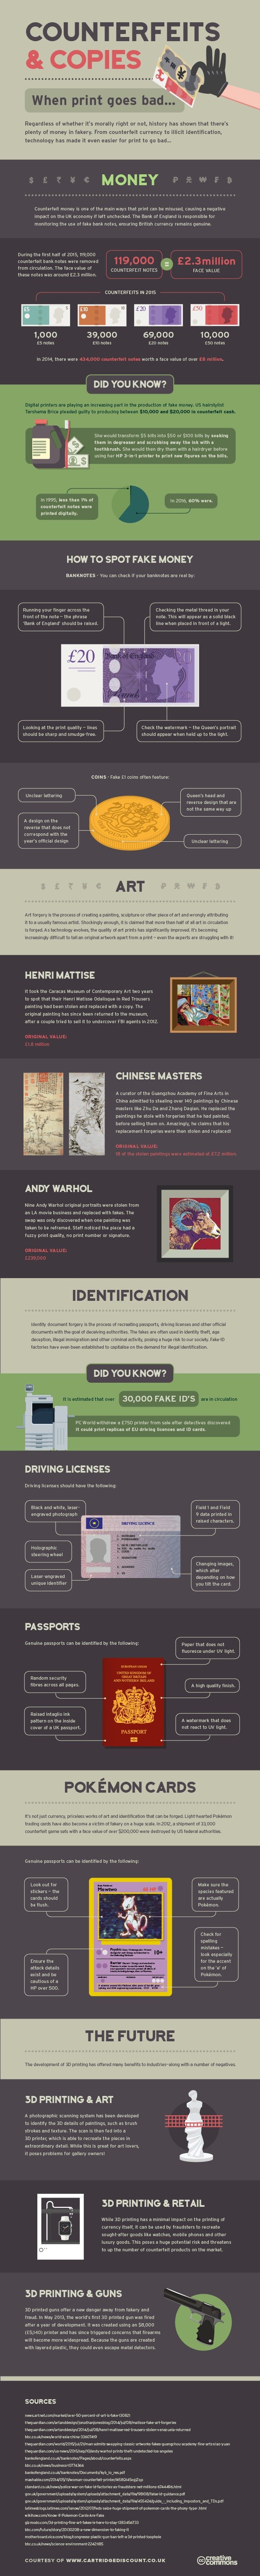 Counterfeits & Copies (graphic)